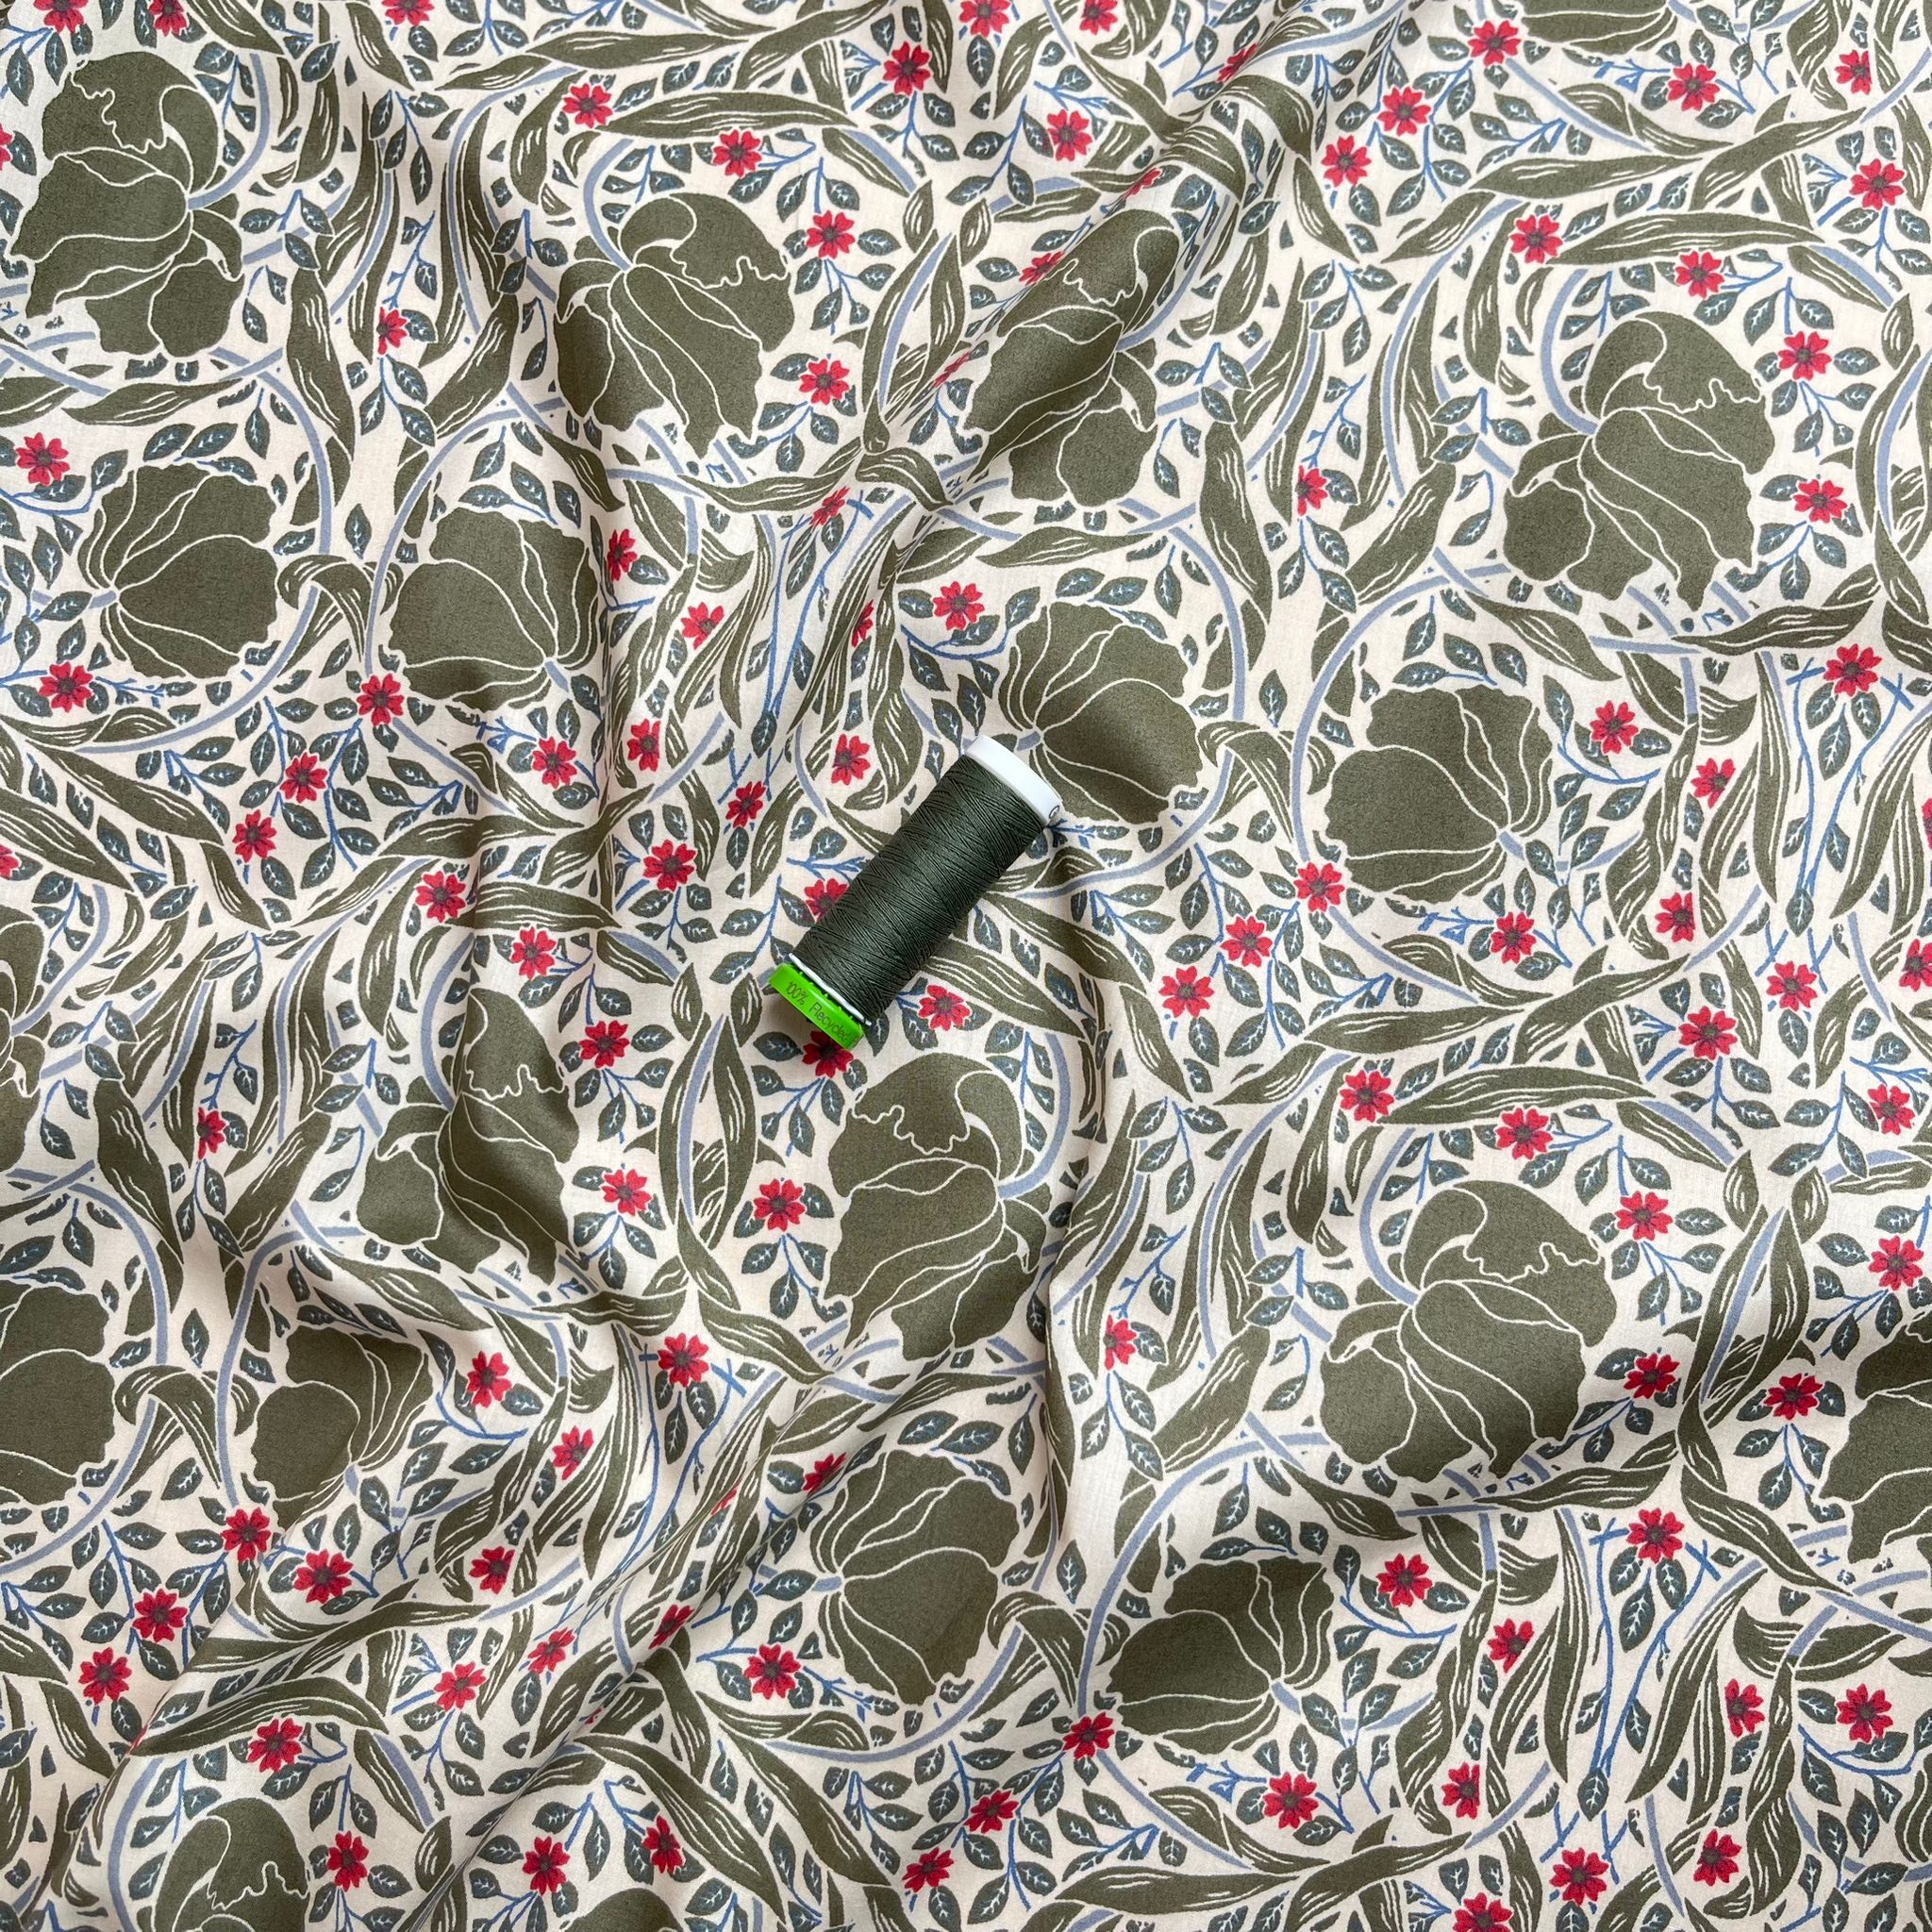 Entwined Flowers Khaki Green Cotton Lawn Fabric